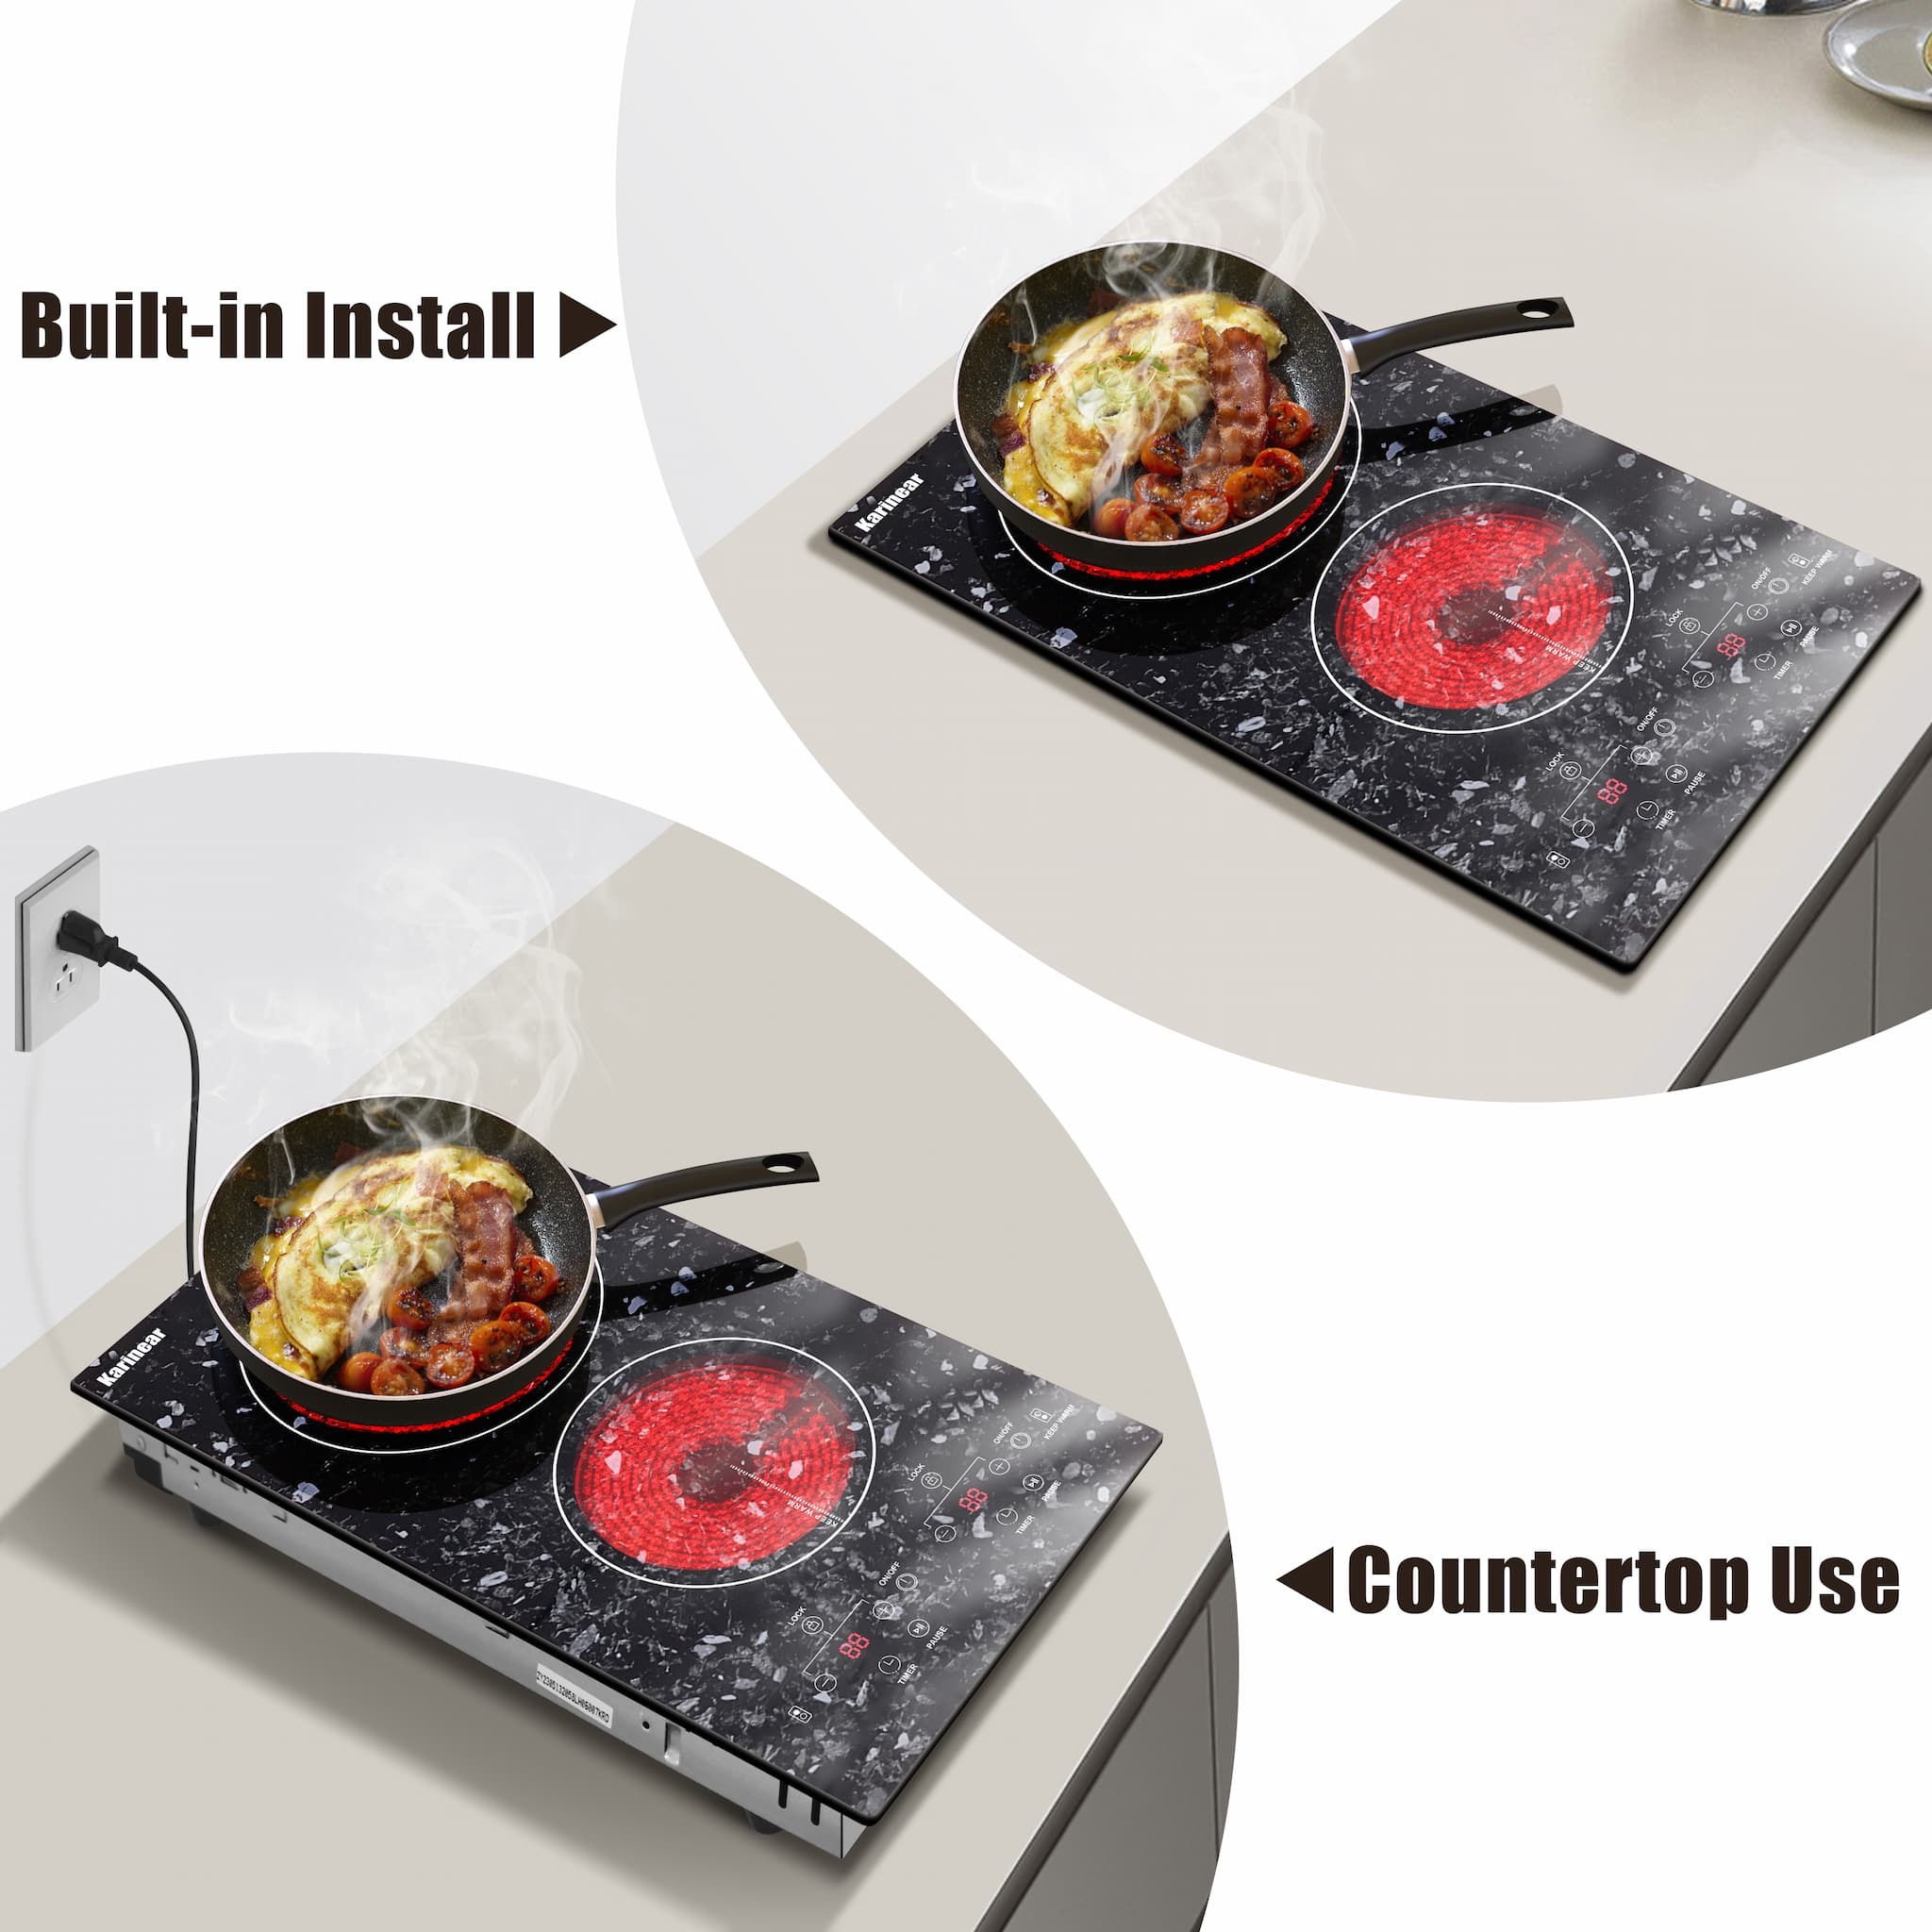 this is Karinear upgraded version of electric stove, we added Marble pattern to it on the glass to make the whole stove look better. Bring home this Marble pattern 12 inch electric cooktop and make your kitchen even more special, less monotonous. ( Burner won't stay red all the time, it cycles to turn red.)